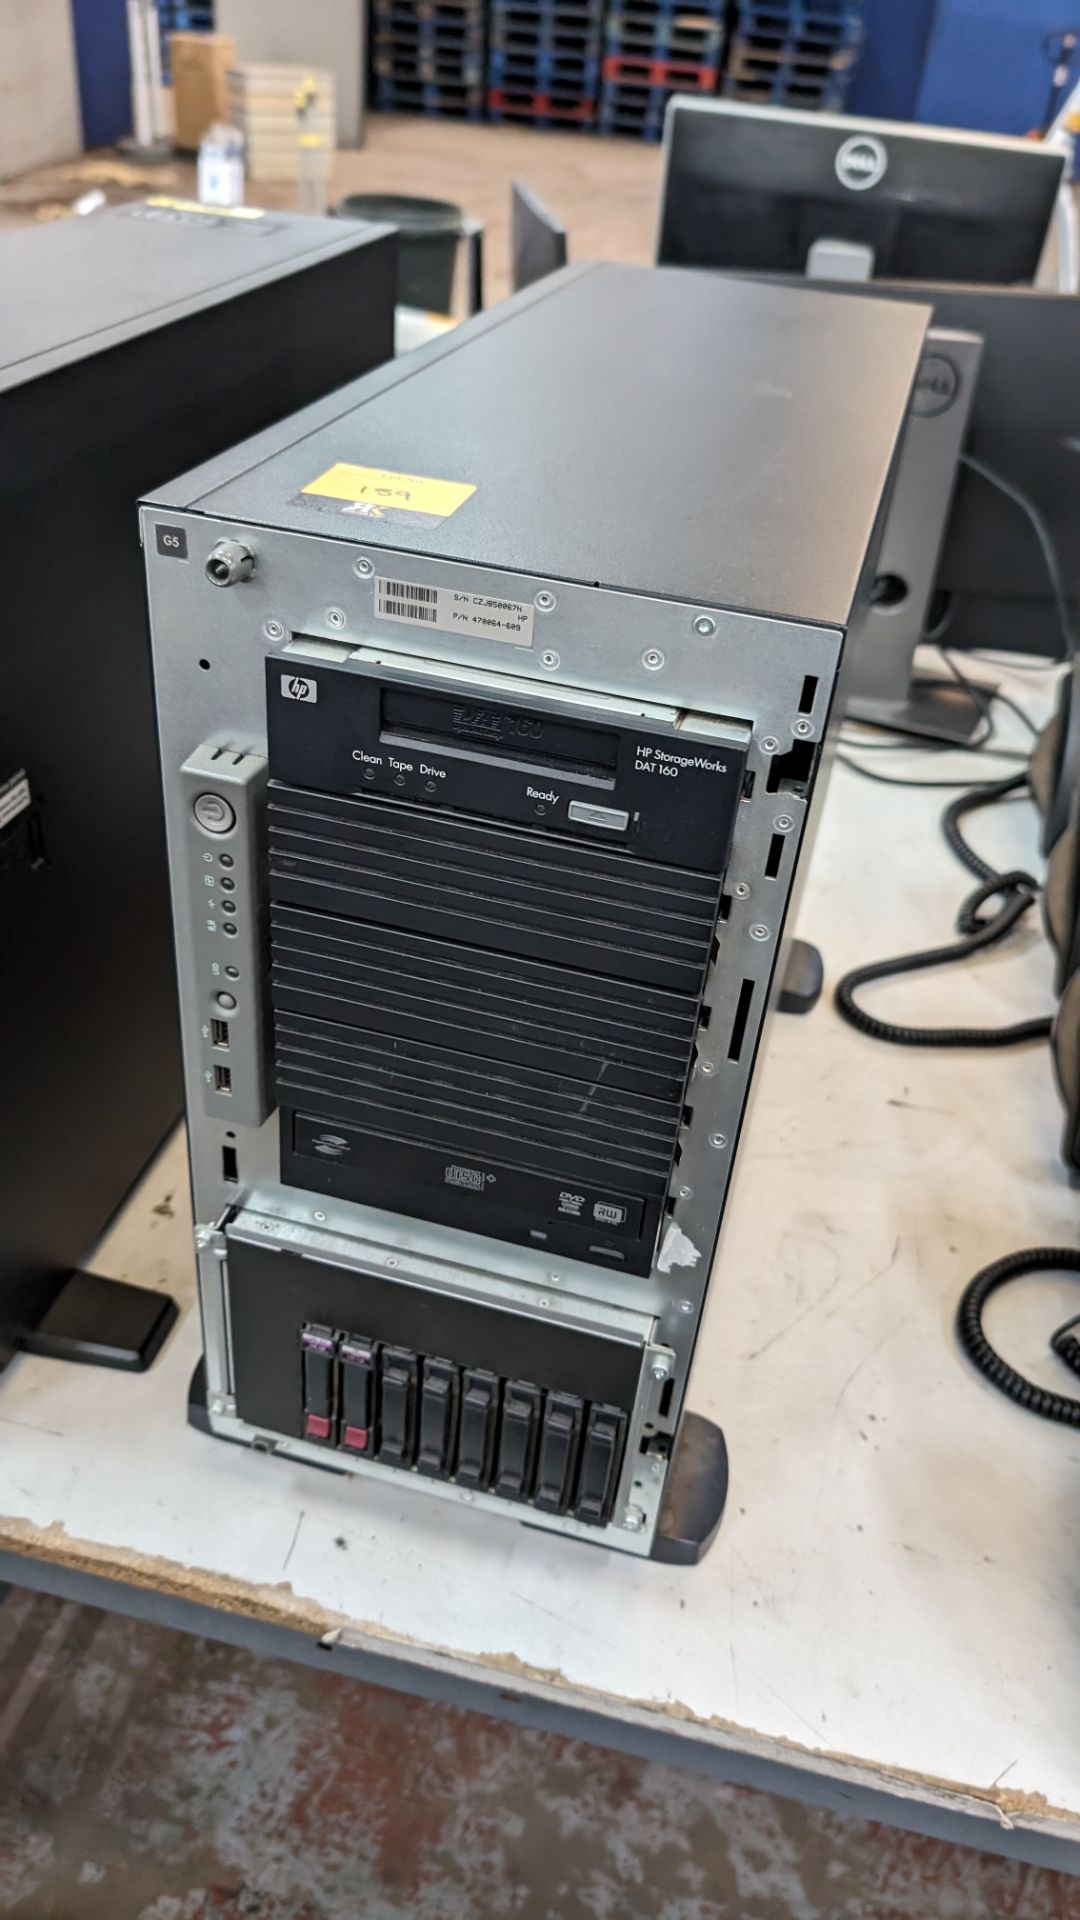 HP server incorporating 2 off hot swap drives, optical drive & HP Storageworks DAT 160 tape drive - Image 2 of 15